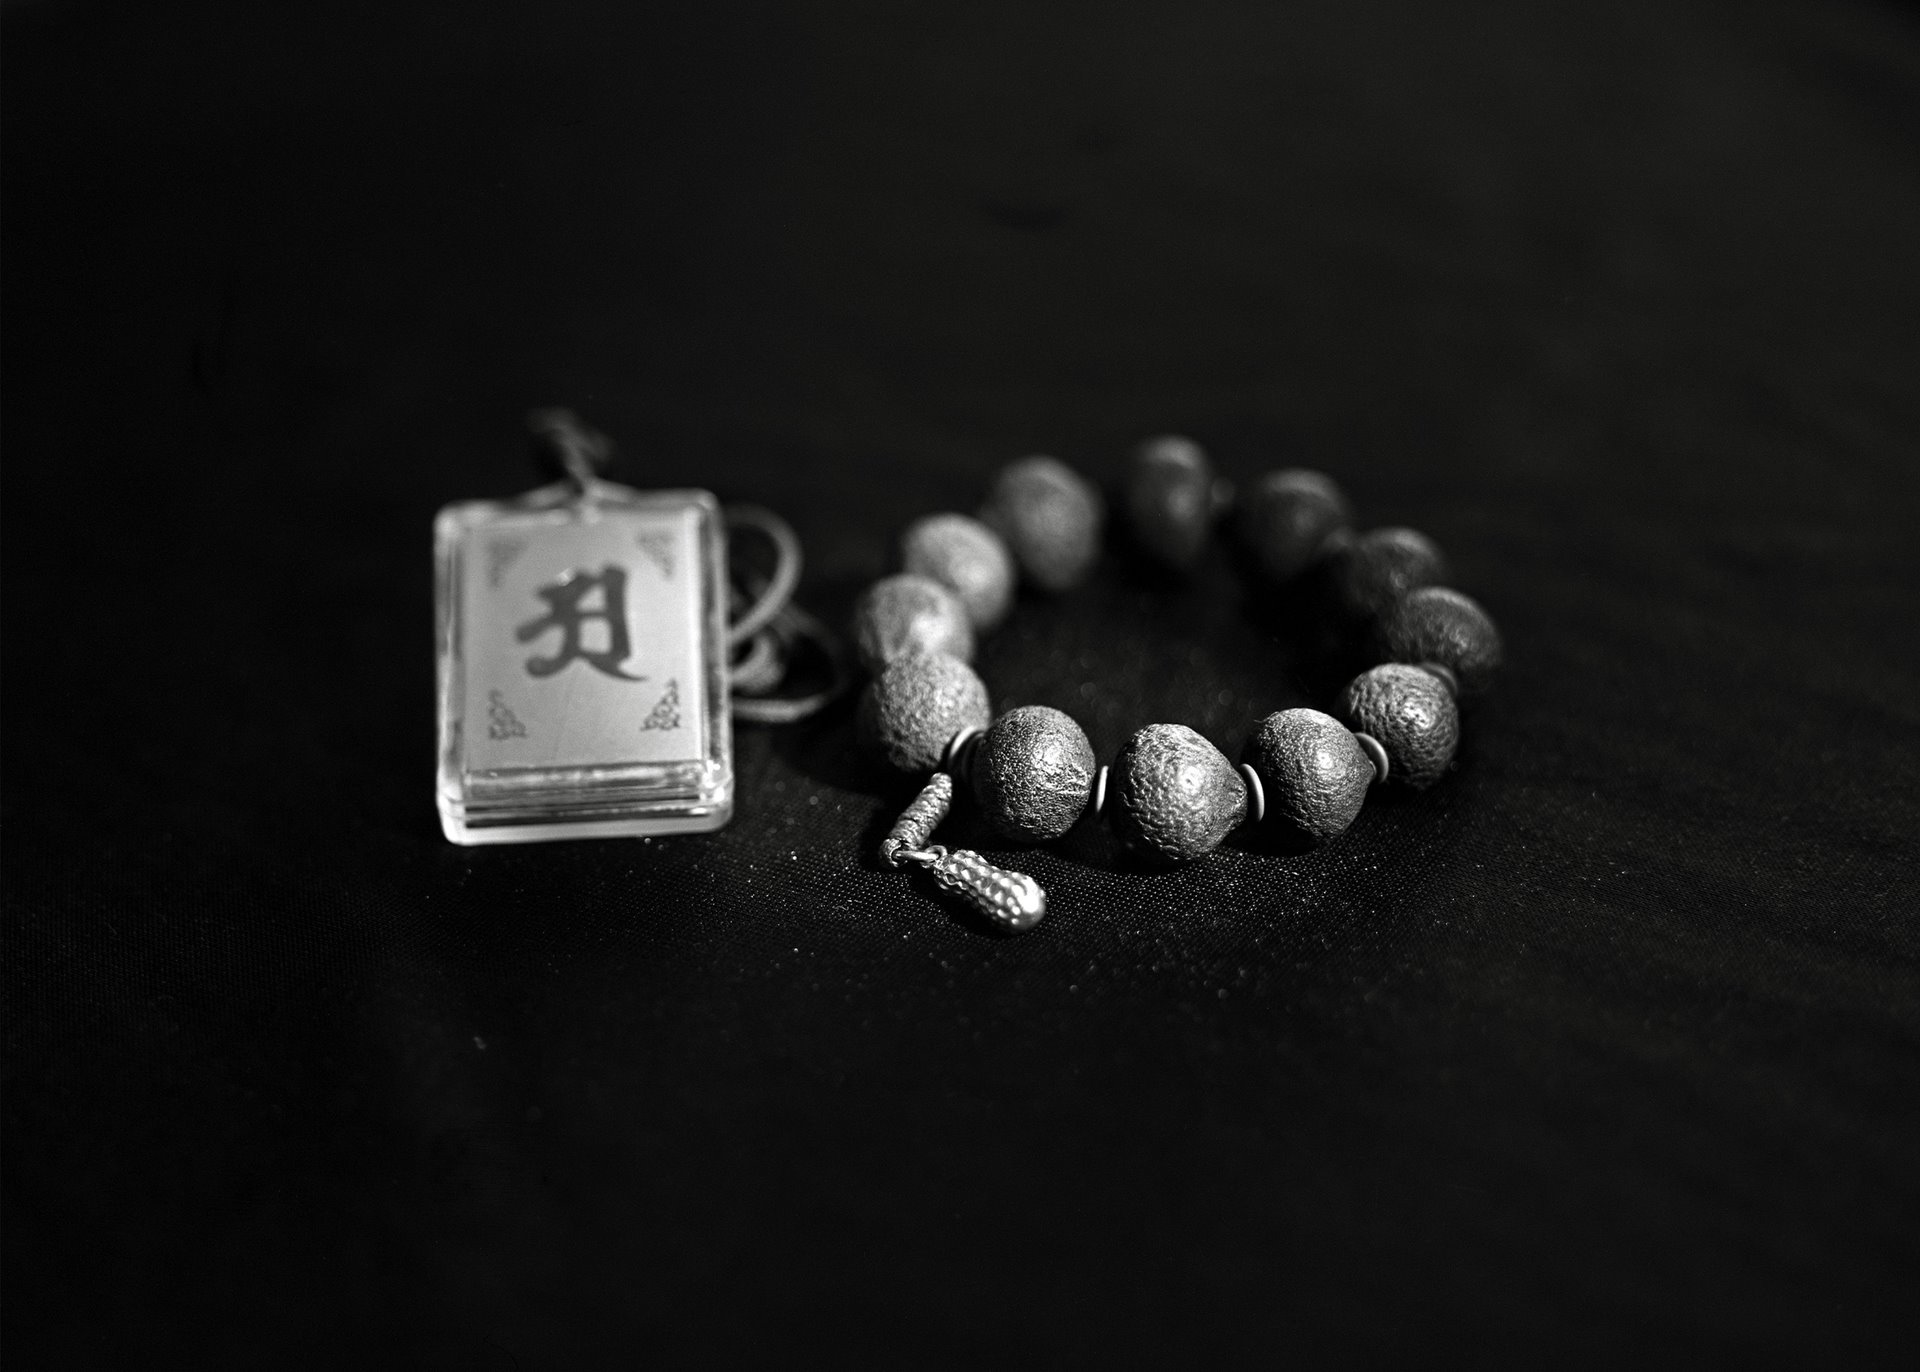 In the later stages of her illness, Jiuer spoke of her personal belongings, especially a cherished bracelet made of small dried mandarins (&ldquo;júzi&rdquo; in Chinese), bamboo (&ldquo;zhúzi&rdquo;), and gold (&ldquo;jinzi&rdquo;), which are the nicknames of her children. Jiuer says: &ldquo;Time may pass, but good things don&rsquo;t.&rdquo; Liaoning, China.